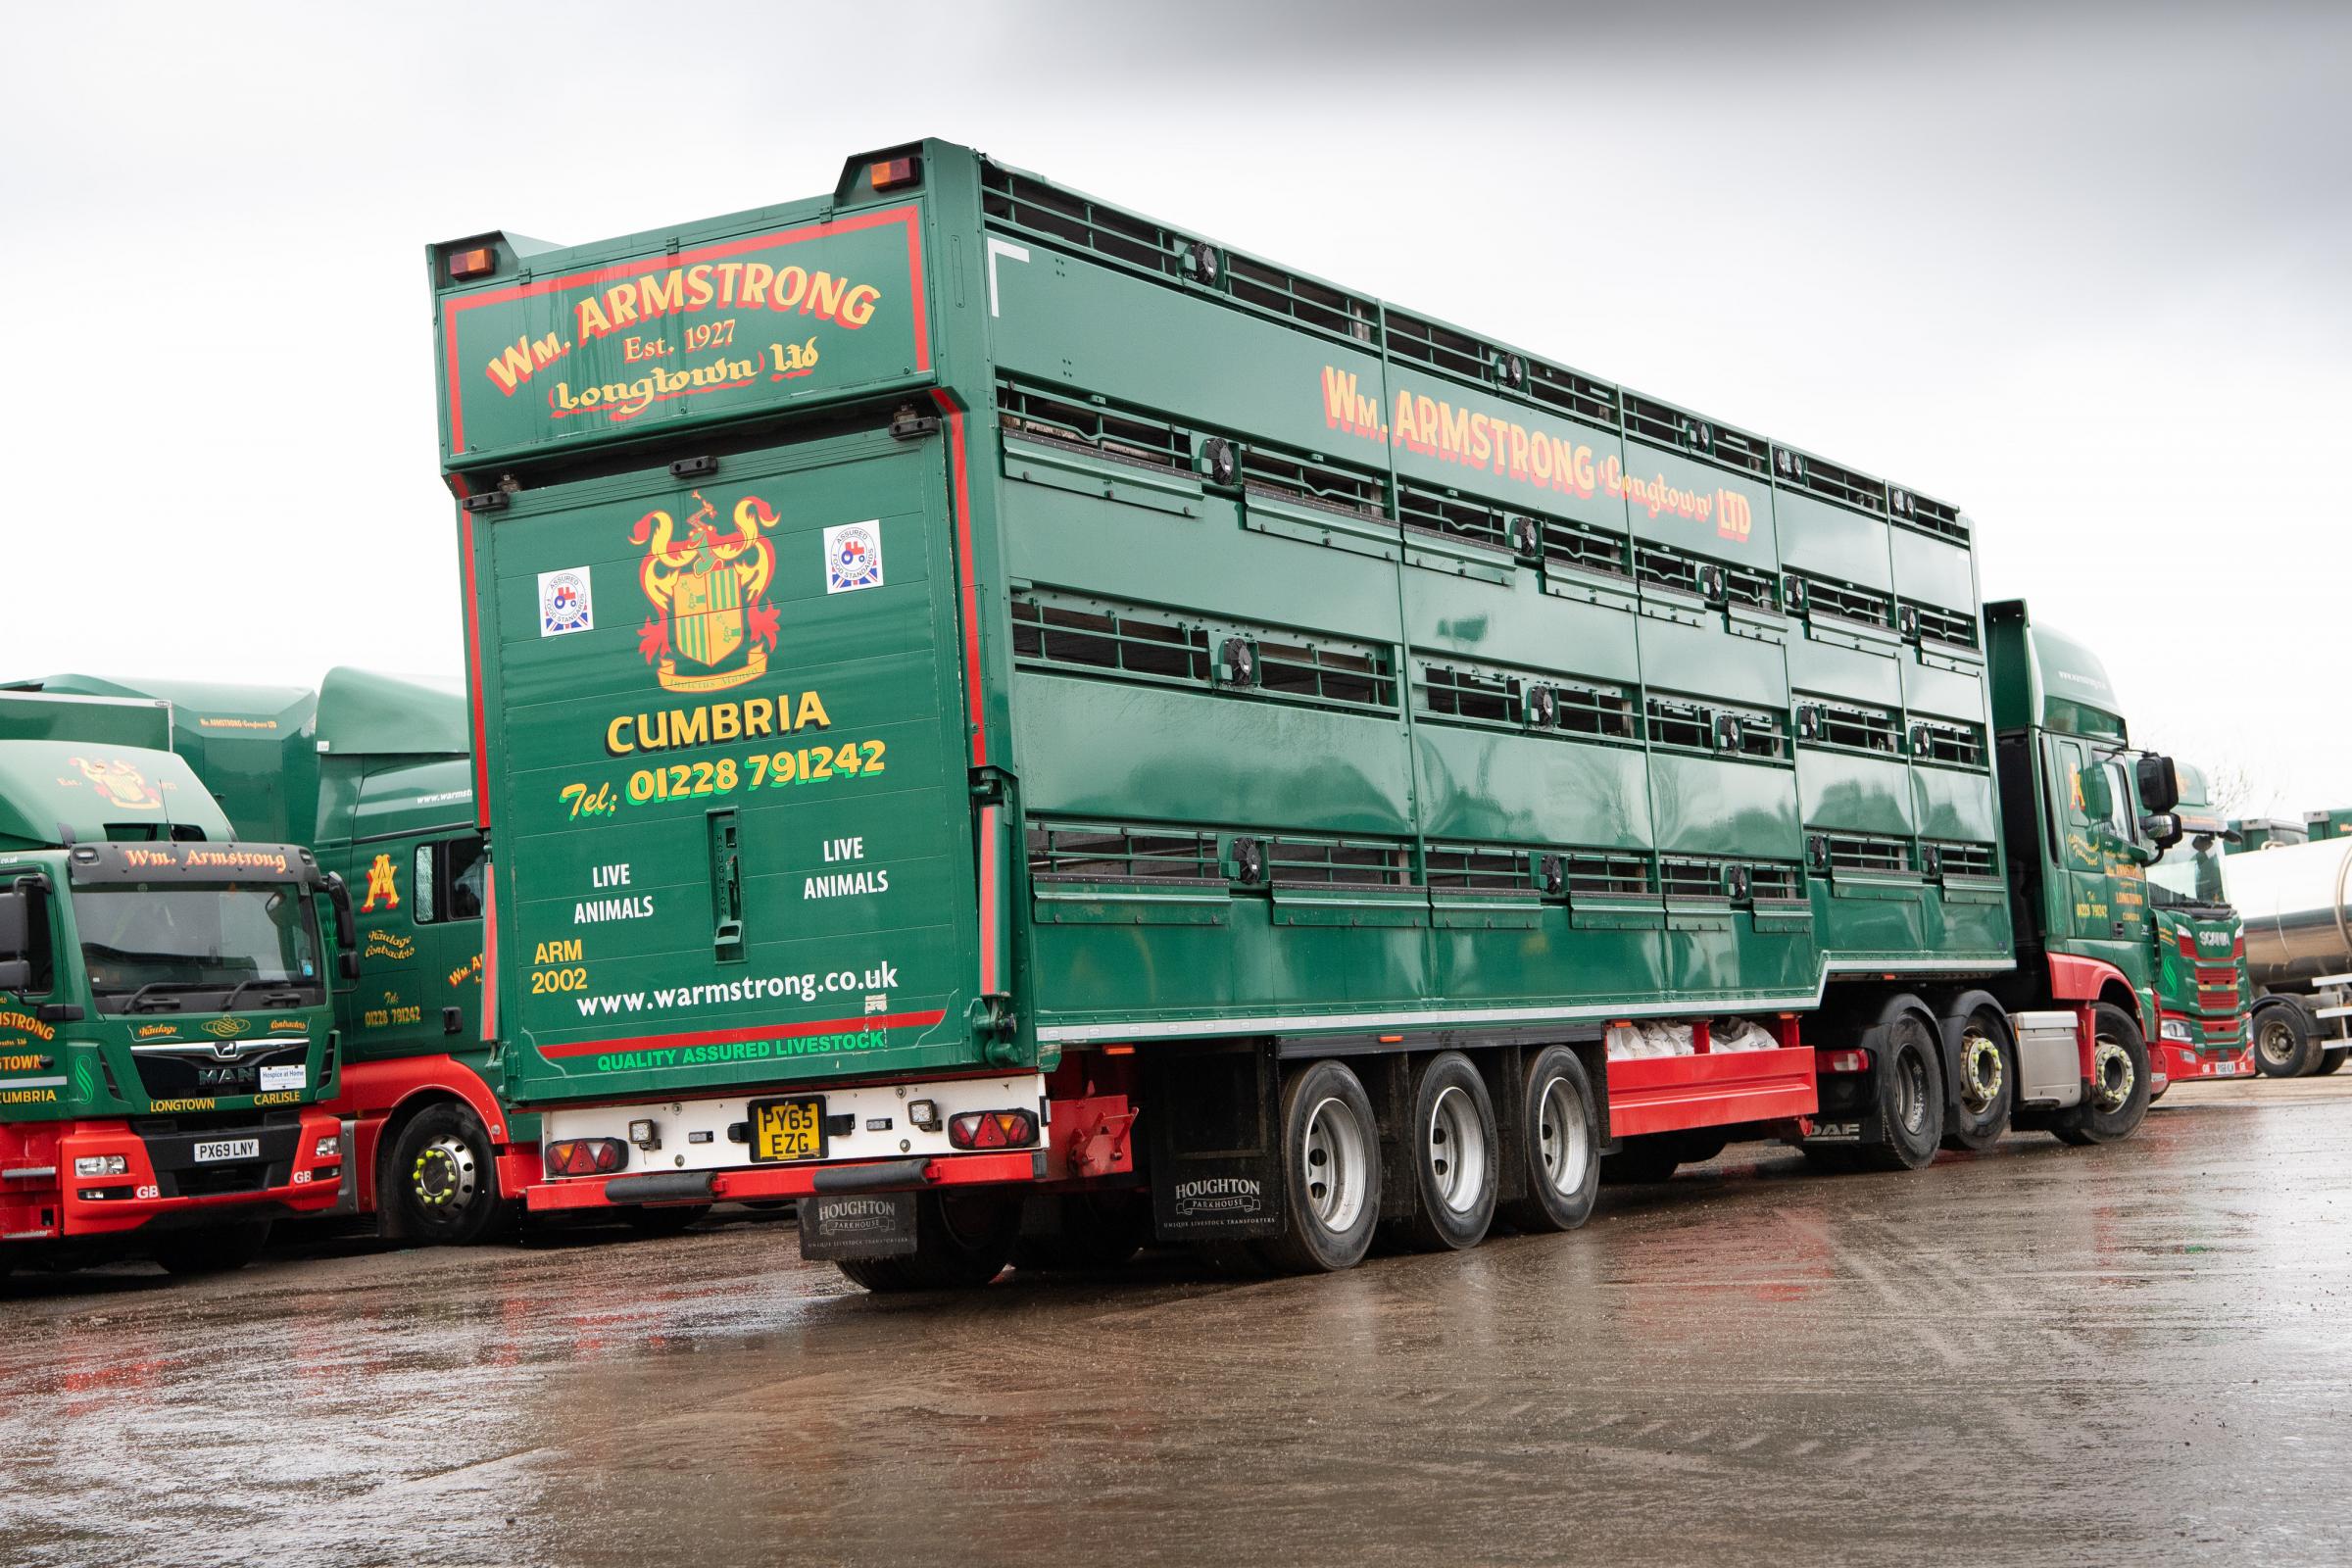 Vehicles operate locally throughout the UK, transporting up to two million animals a year. Armstrong vehicles can be found at all Scottish markets throughout the year Ref:RH200321111 Rob Haining / The Scottish Farmer...